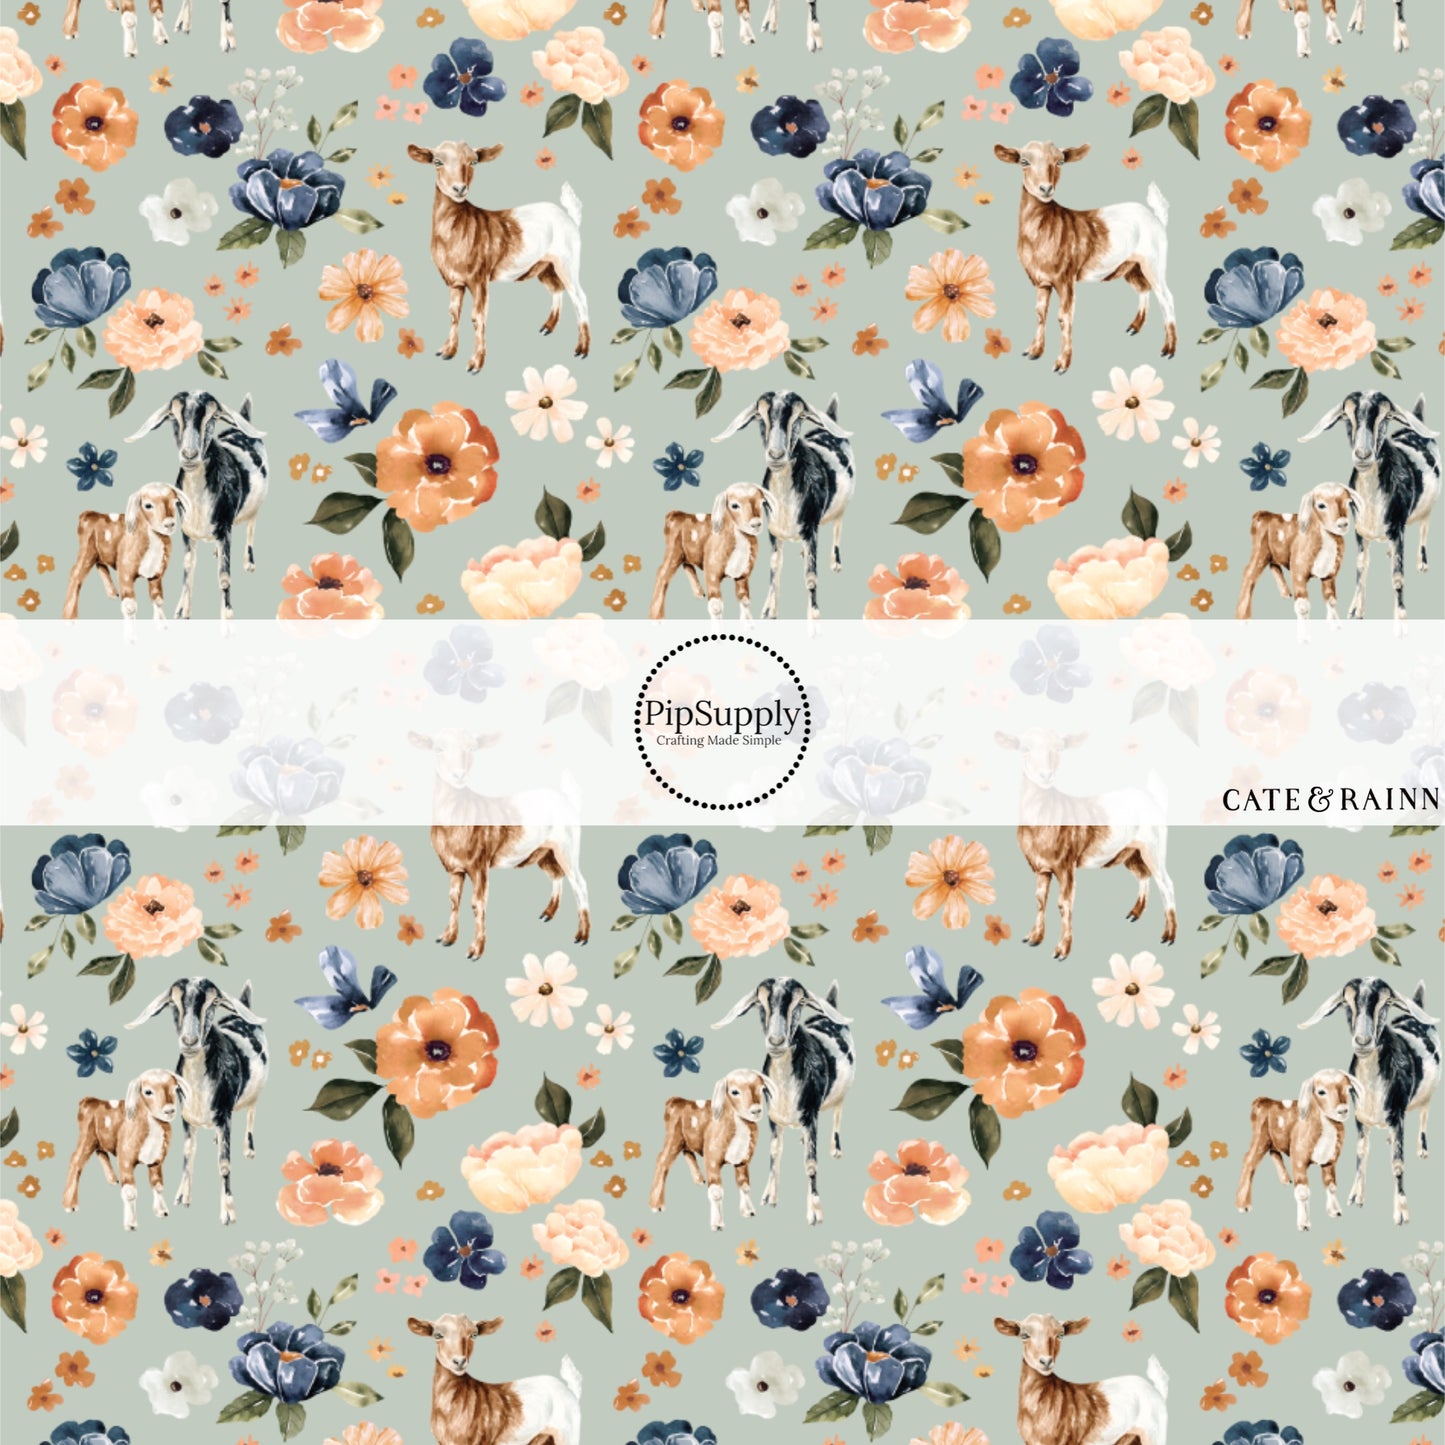 These spring and summer pattern fabric by the yard features farm and meadow goats. This fun fabric can be used for all your sewing and crafting needs!